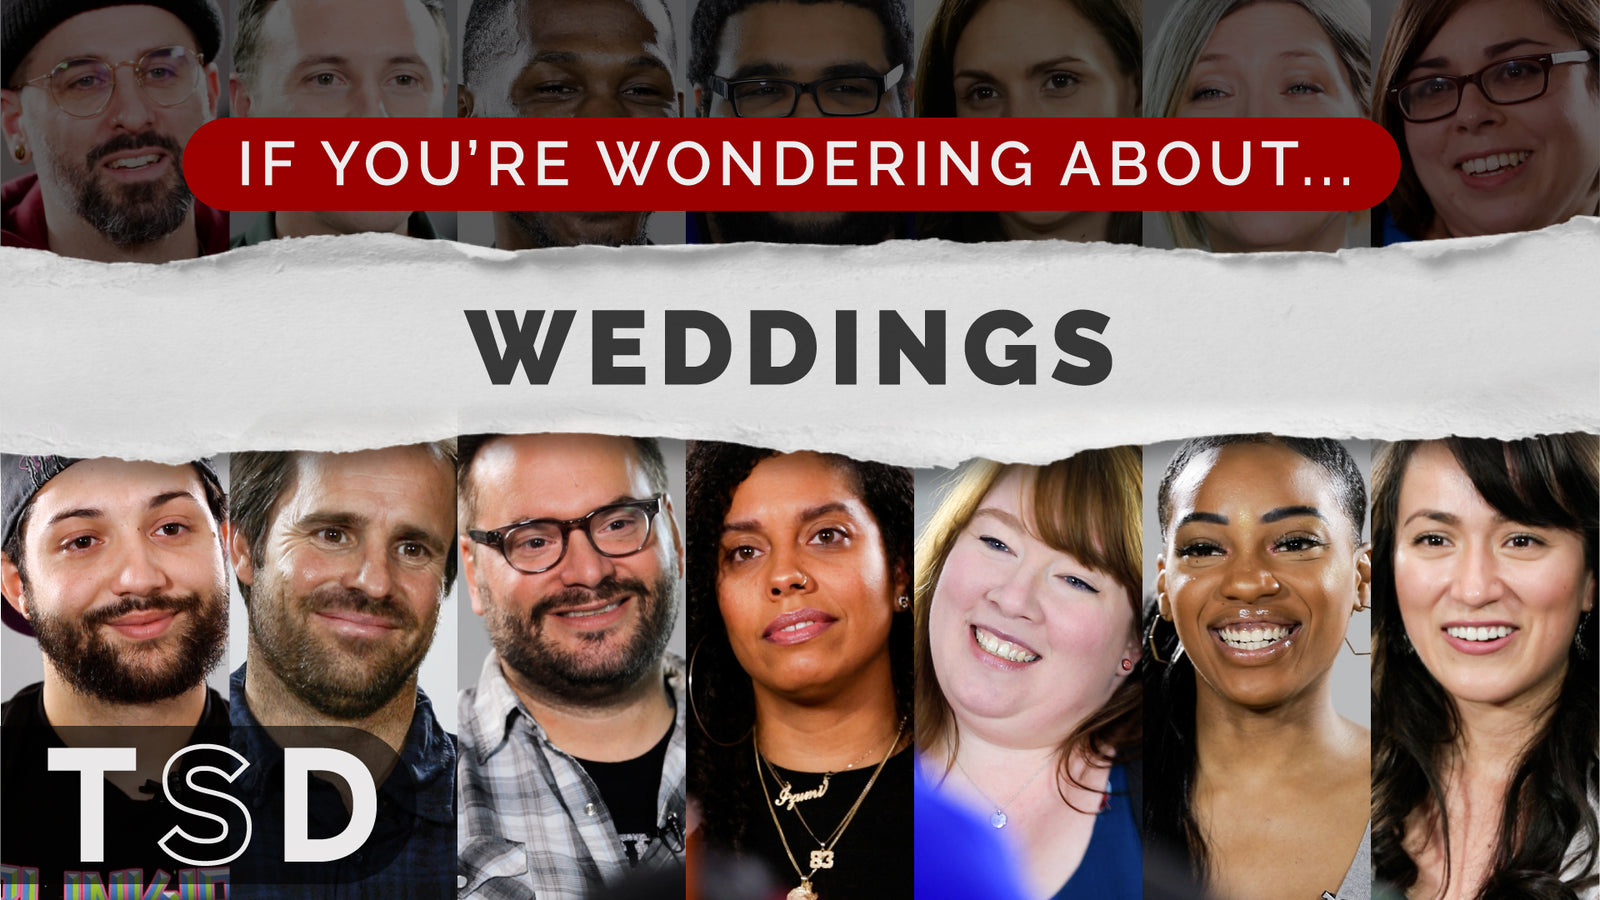 [VIDEO] If You're Wondering About... Weddings